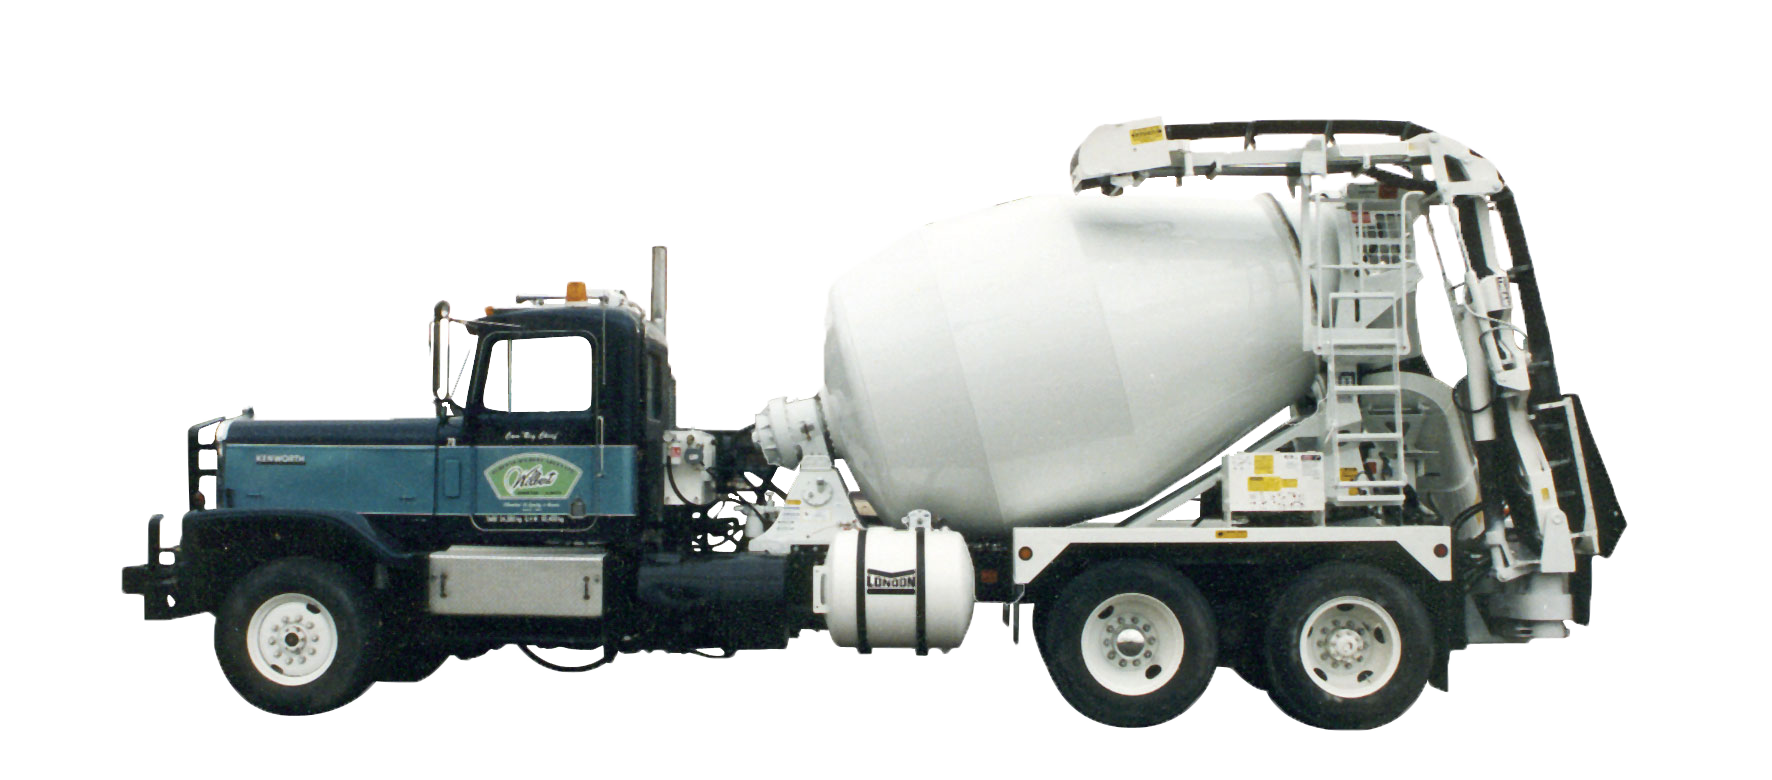 A concrete mixer truck on a white background.